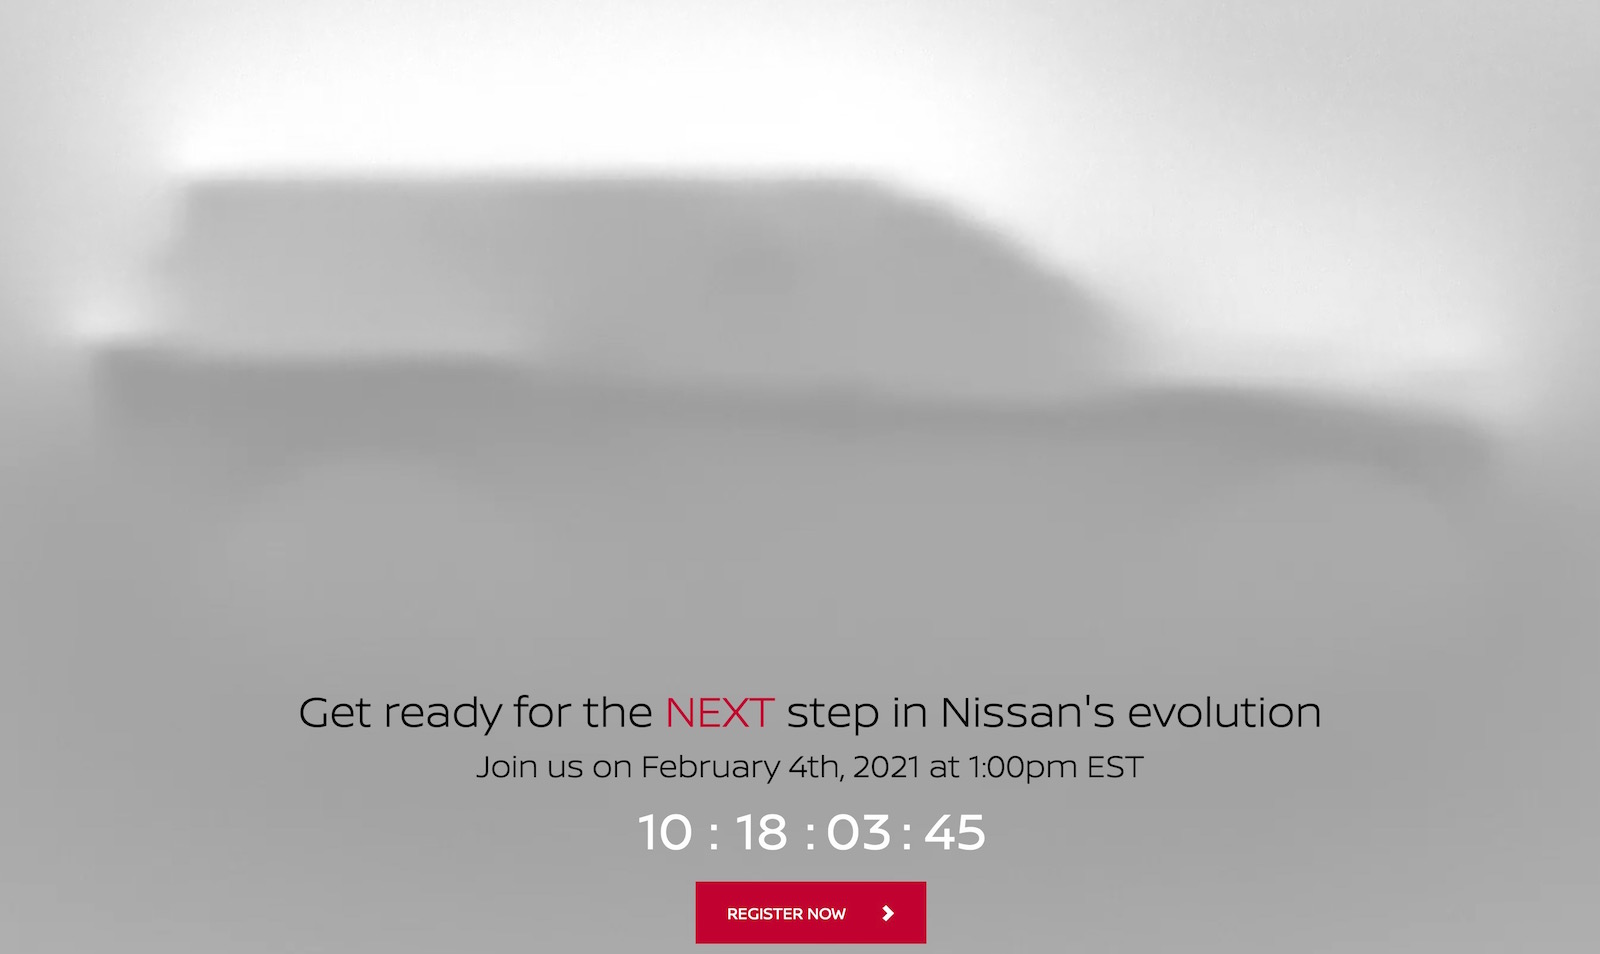 2022 Nissan Pathfinder officially confirmed for February 4 reveal